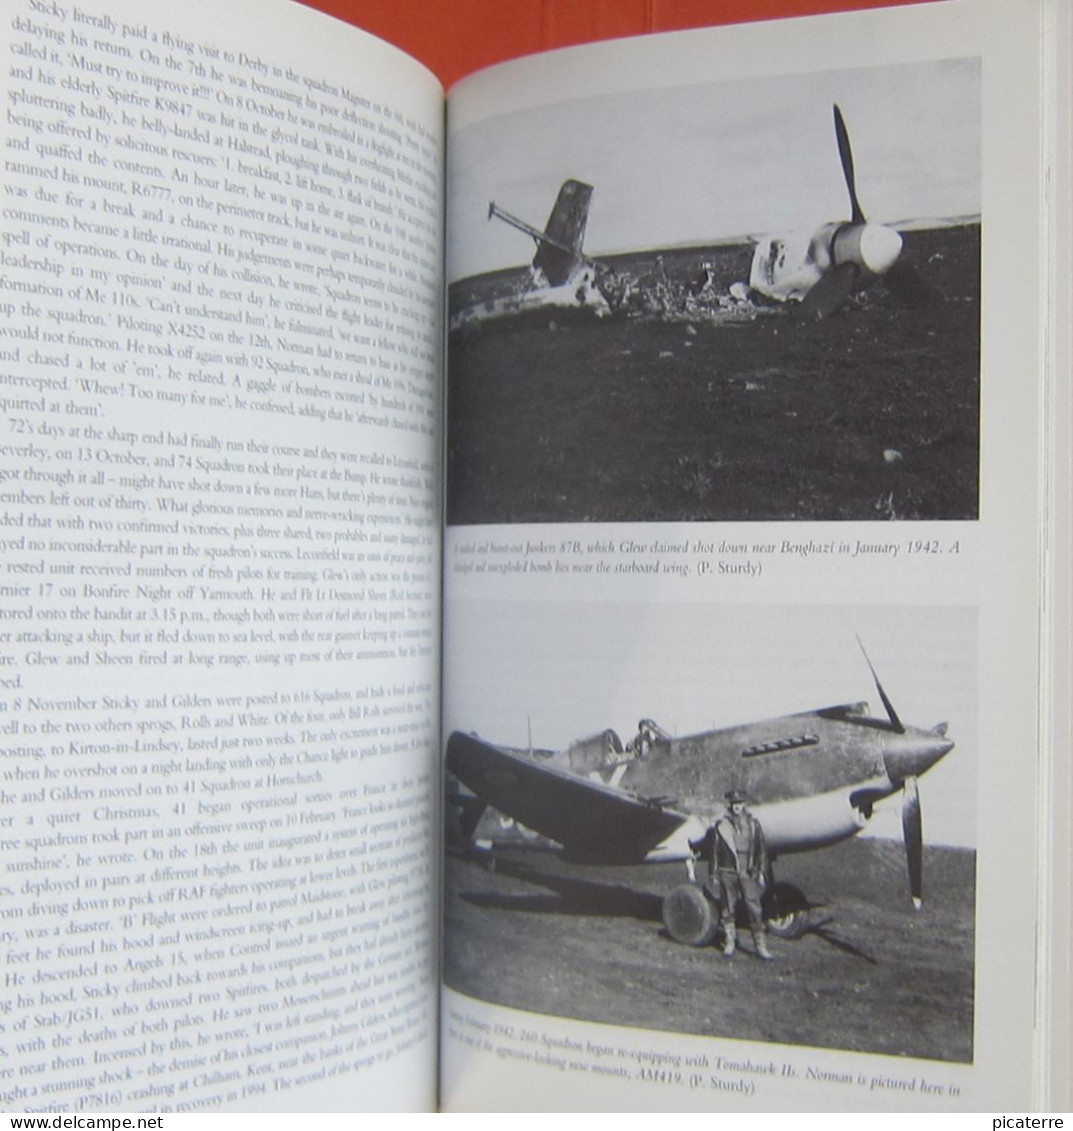 POST FREE UK- MILITARIA-DERBYSHIRE FIGHTER ACES Of World War 2- Barry M.Marsden-1st Ed As NEW-see 6scans - War 1939-45